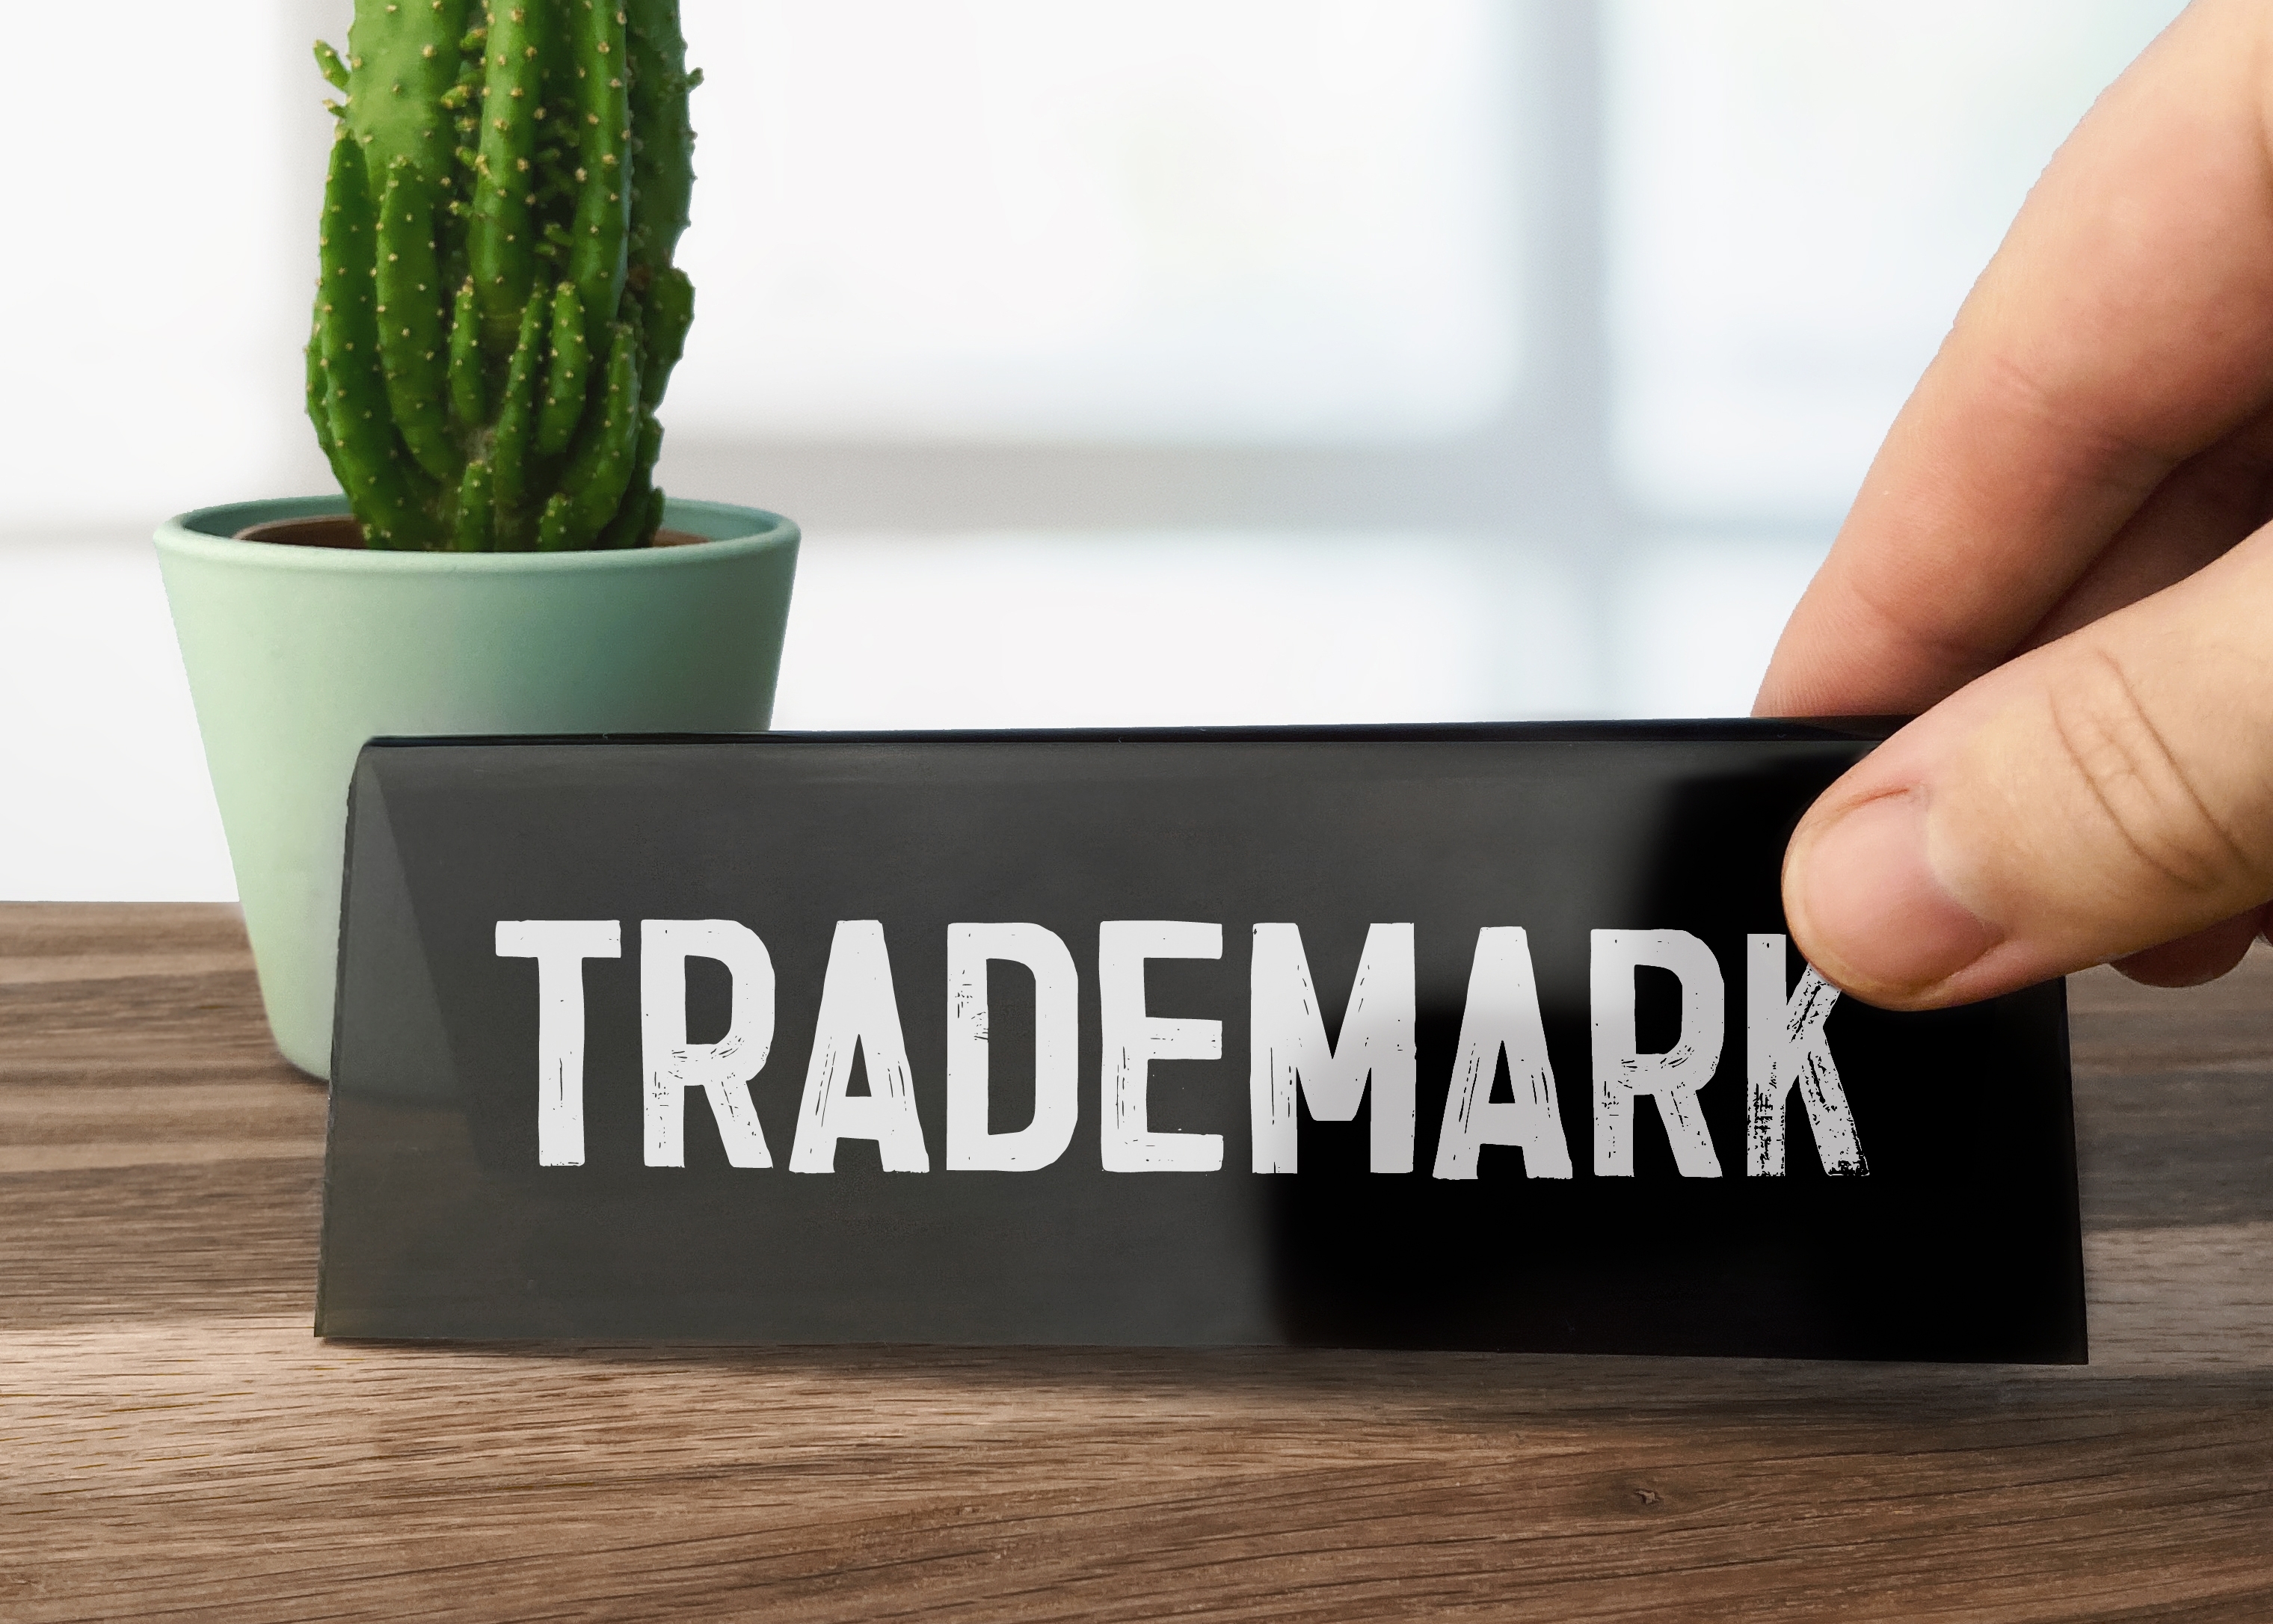 What is a Trademark in the US?